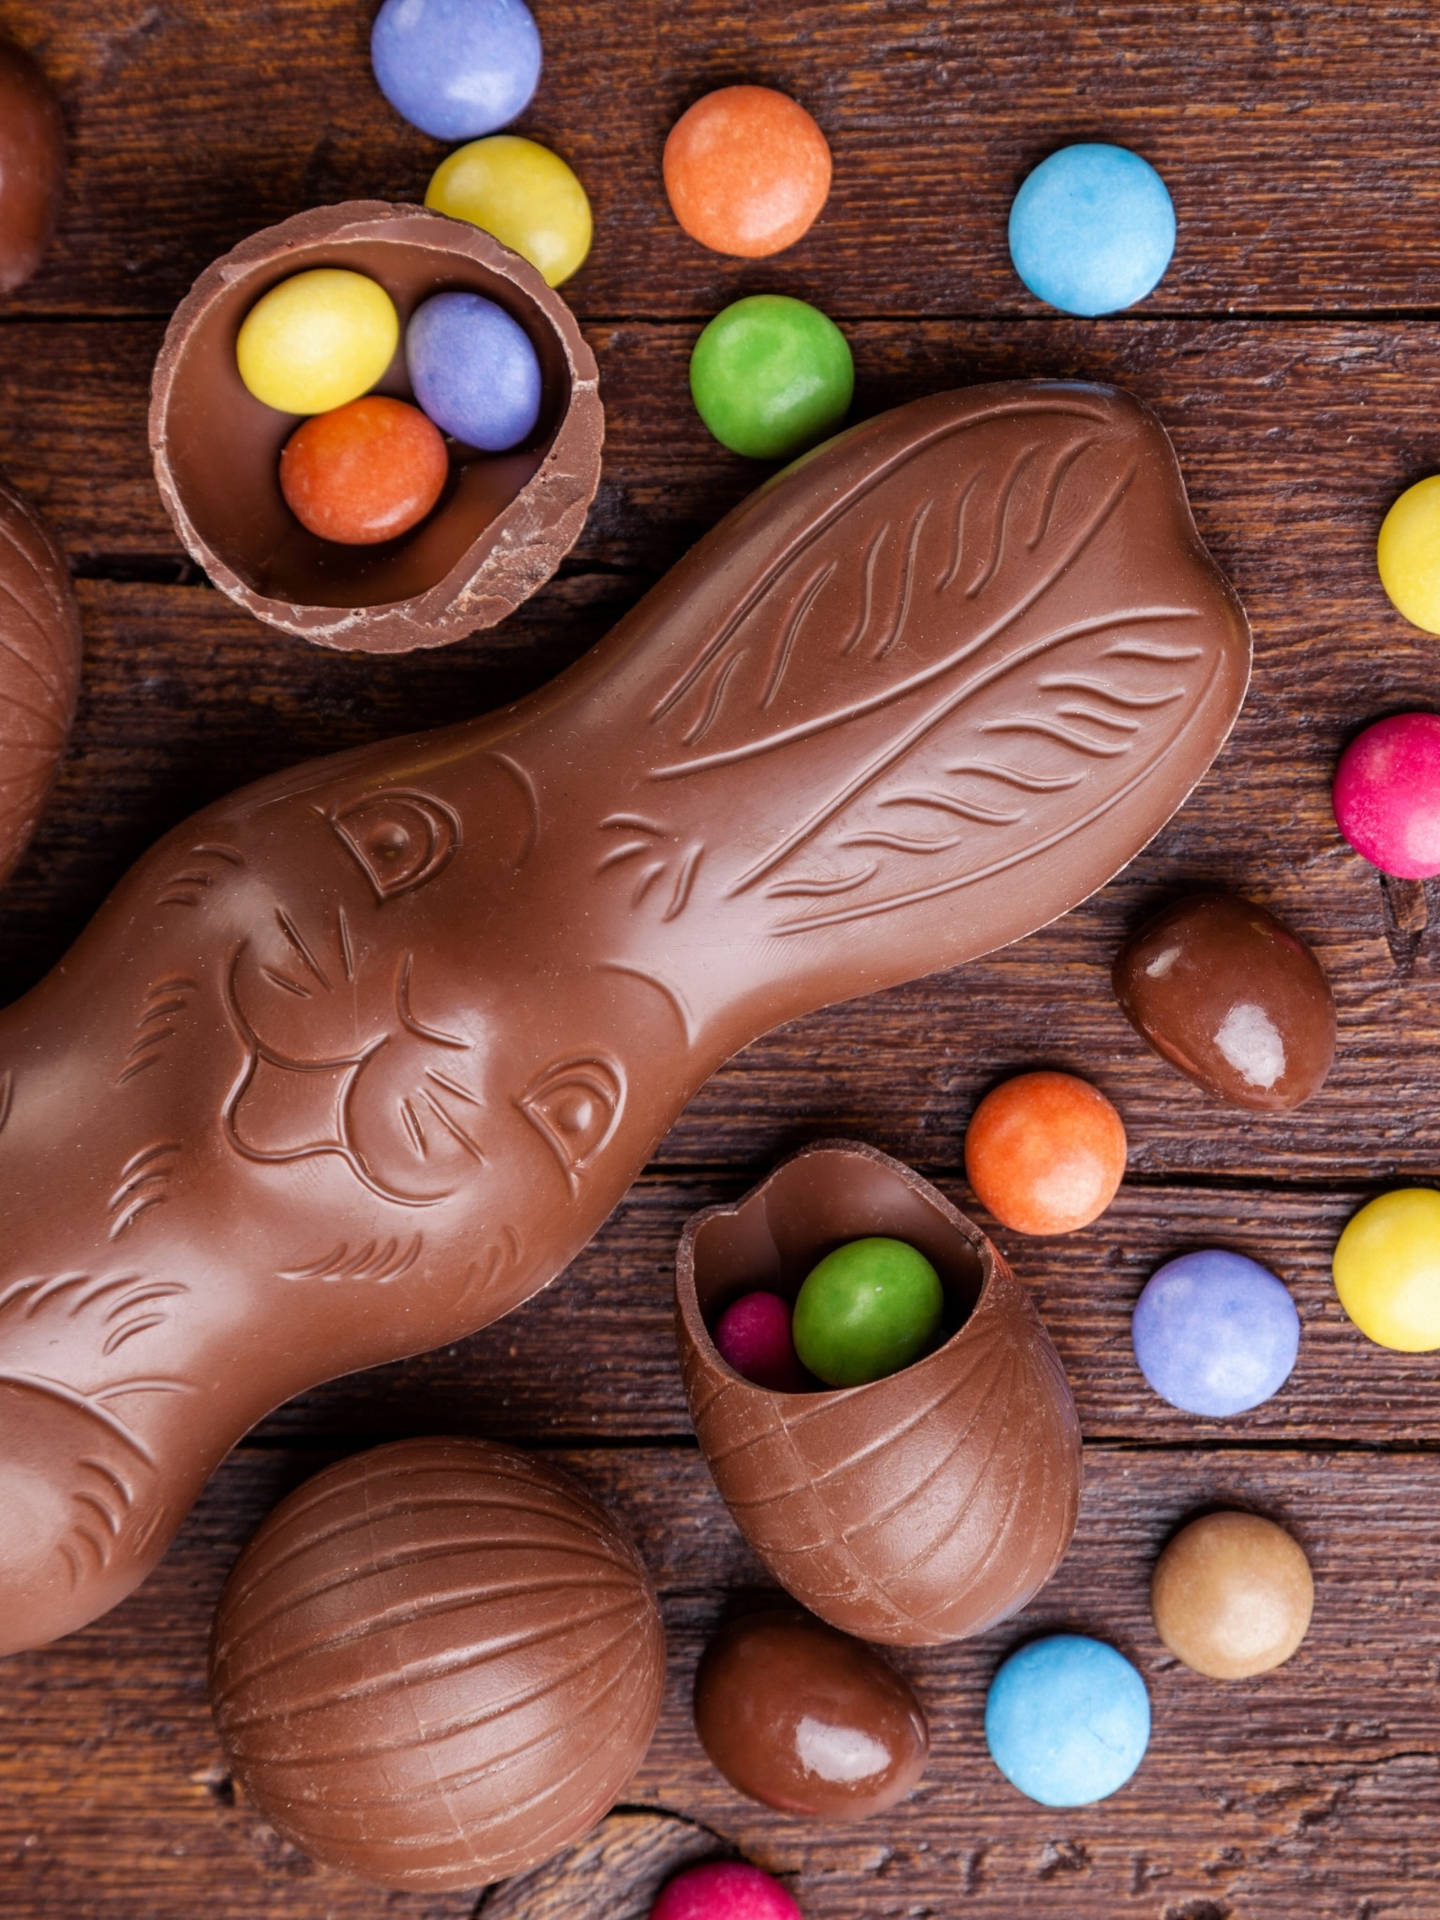 Celebrate Easter with this Chic Phone Wallpaper